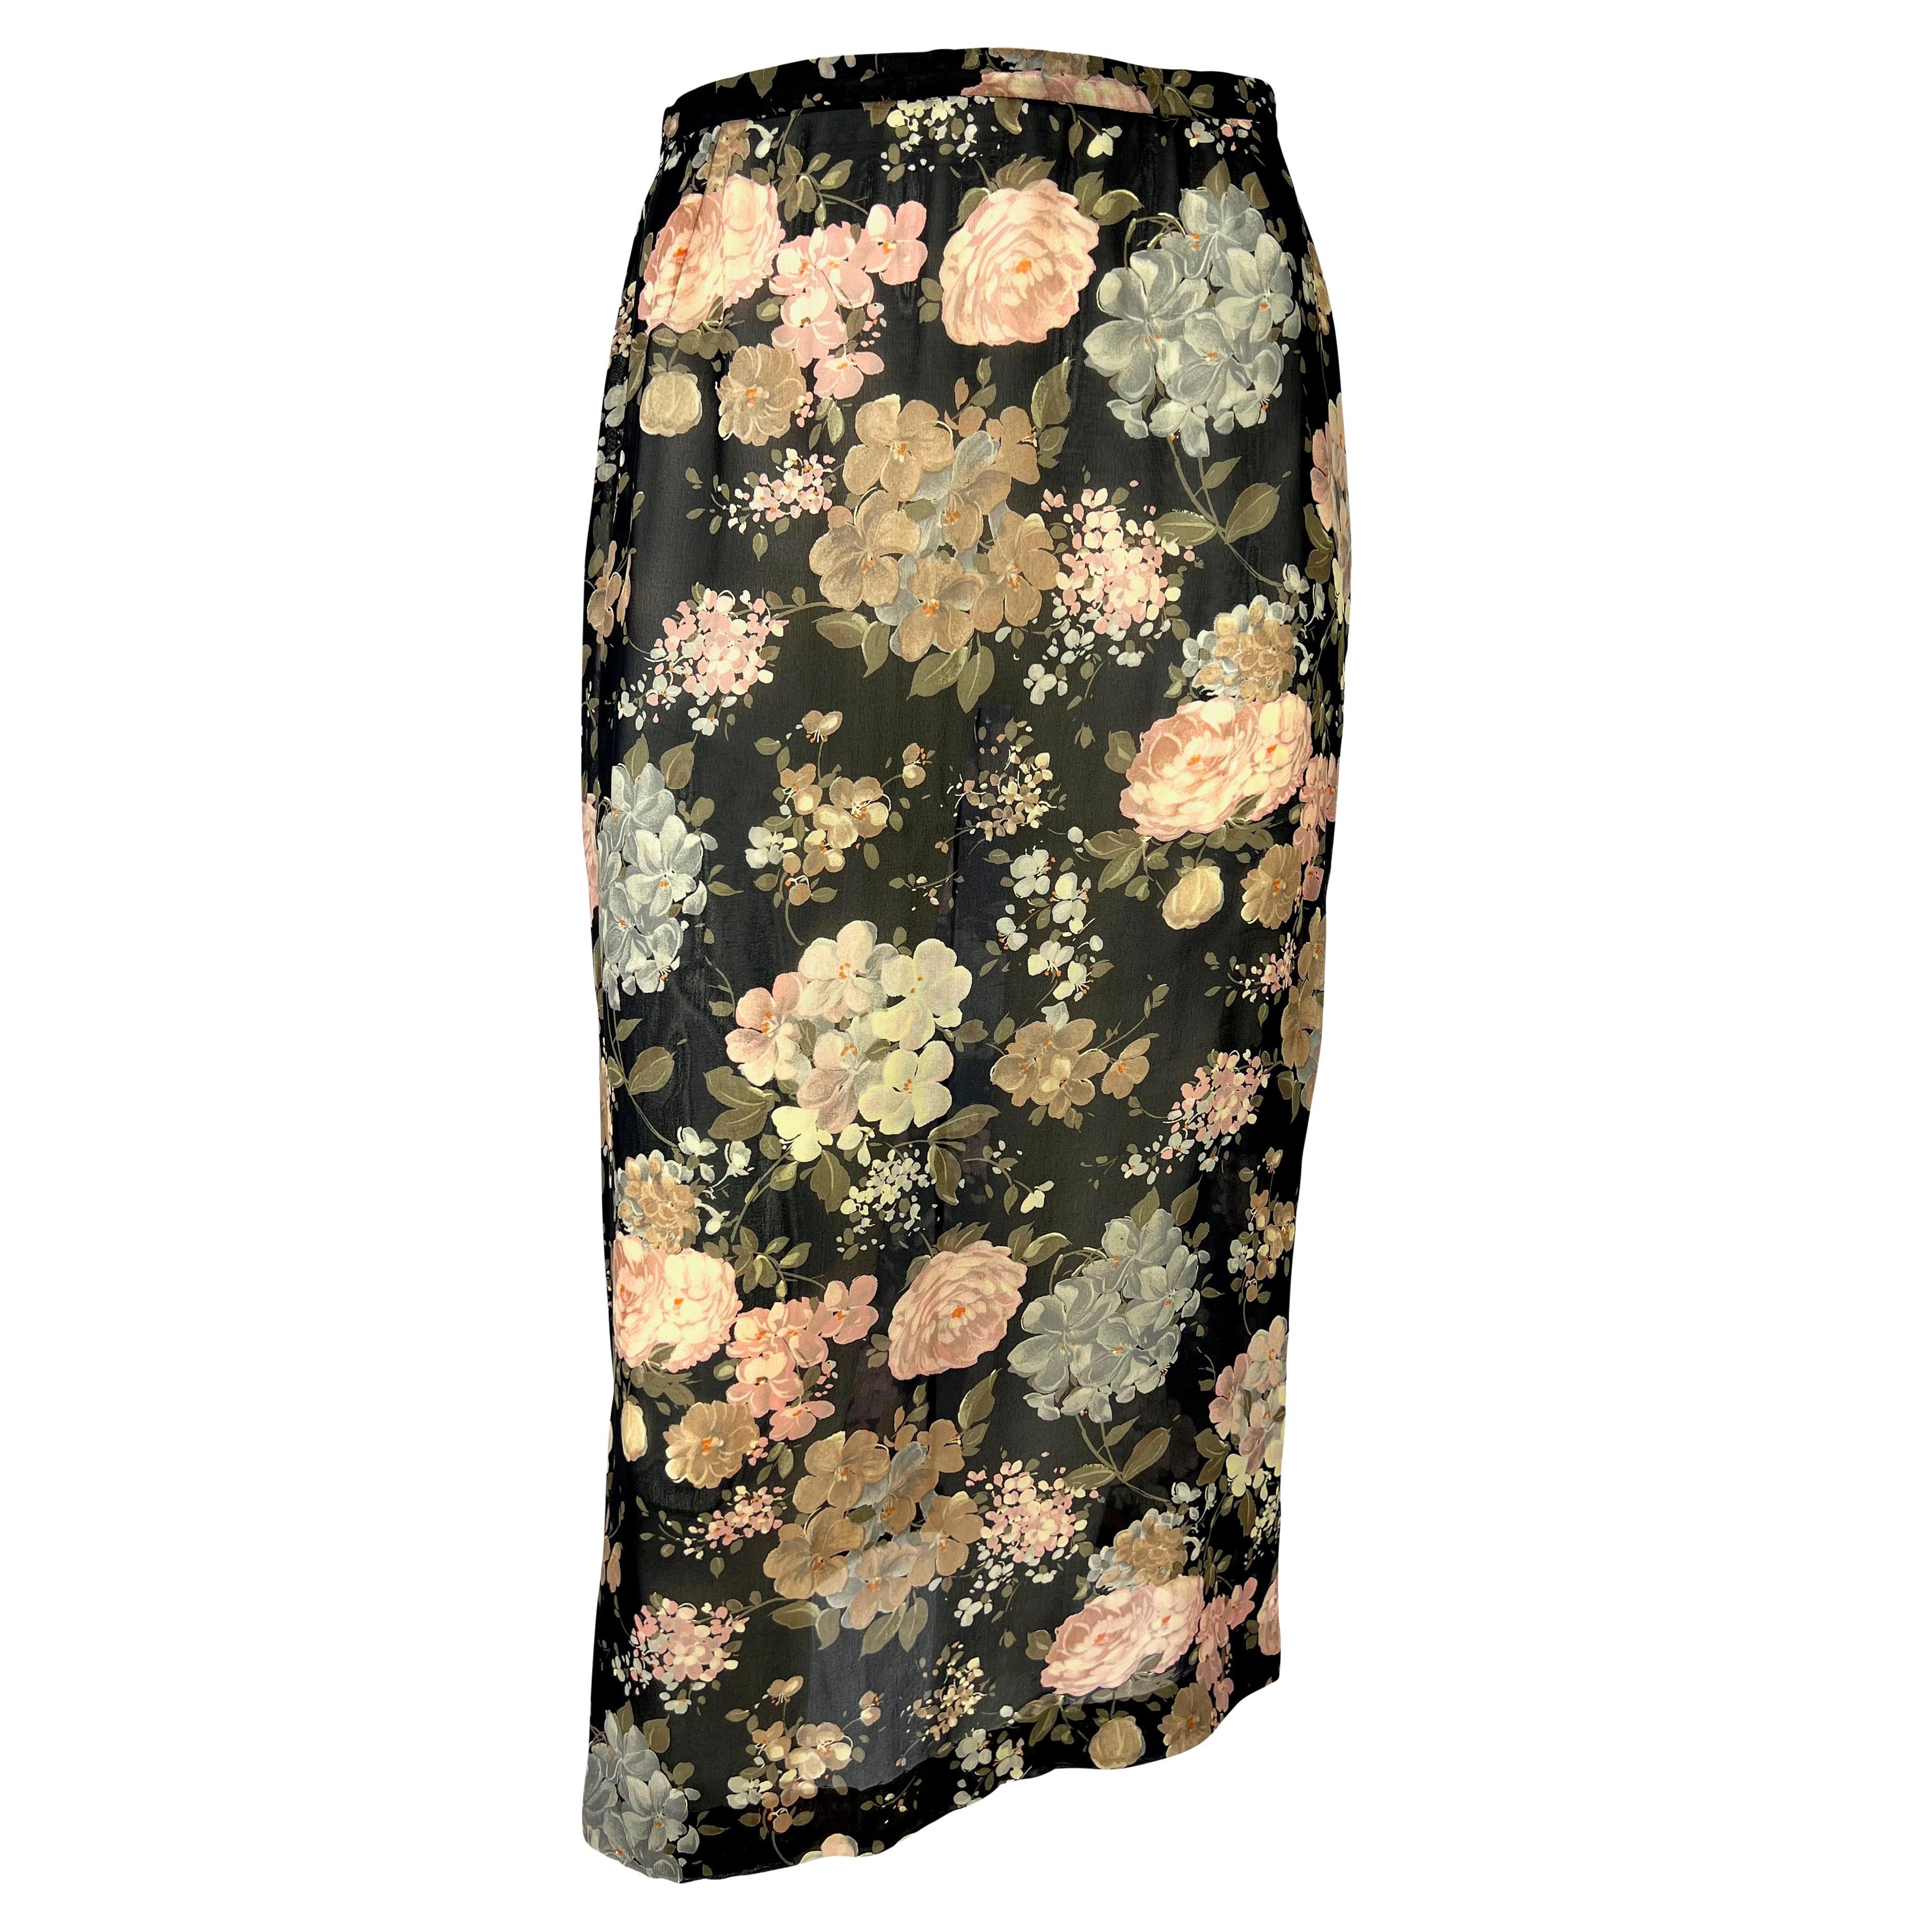 S/S 1997 Dolce & Gabbana Sheer Floral Black Pencil Bodycon Pin-Up Skirt